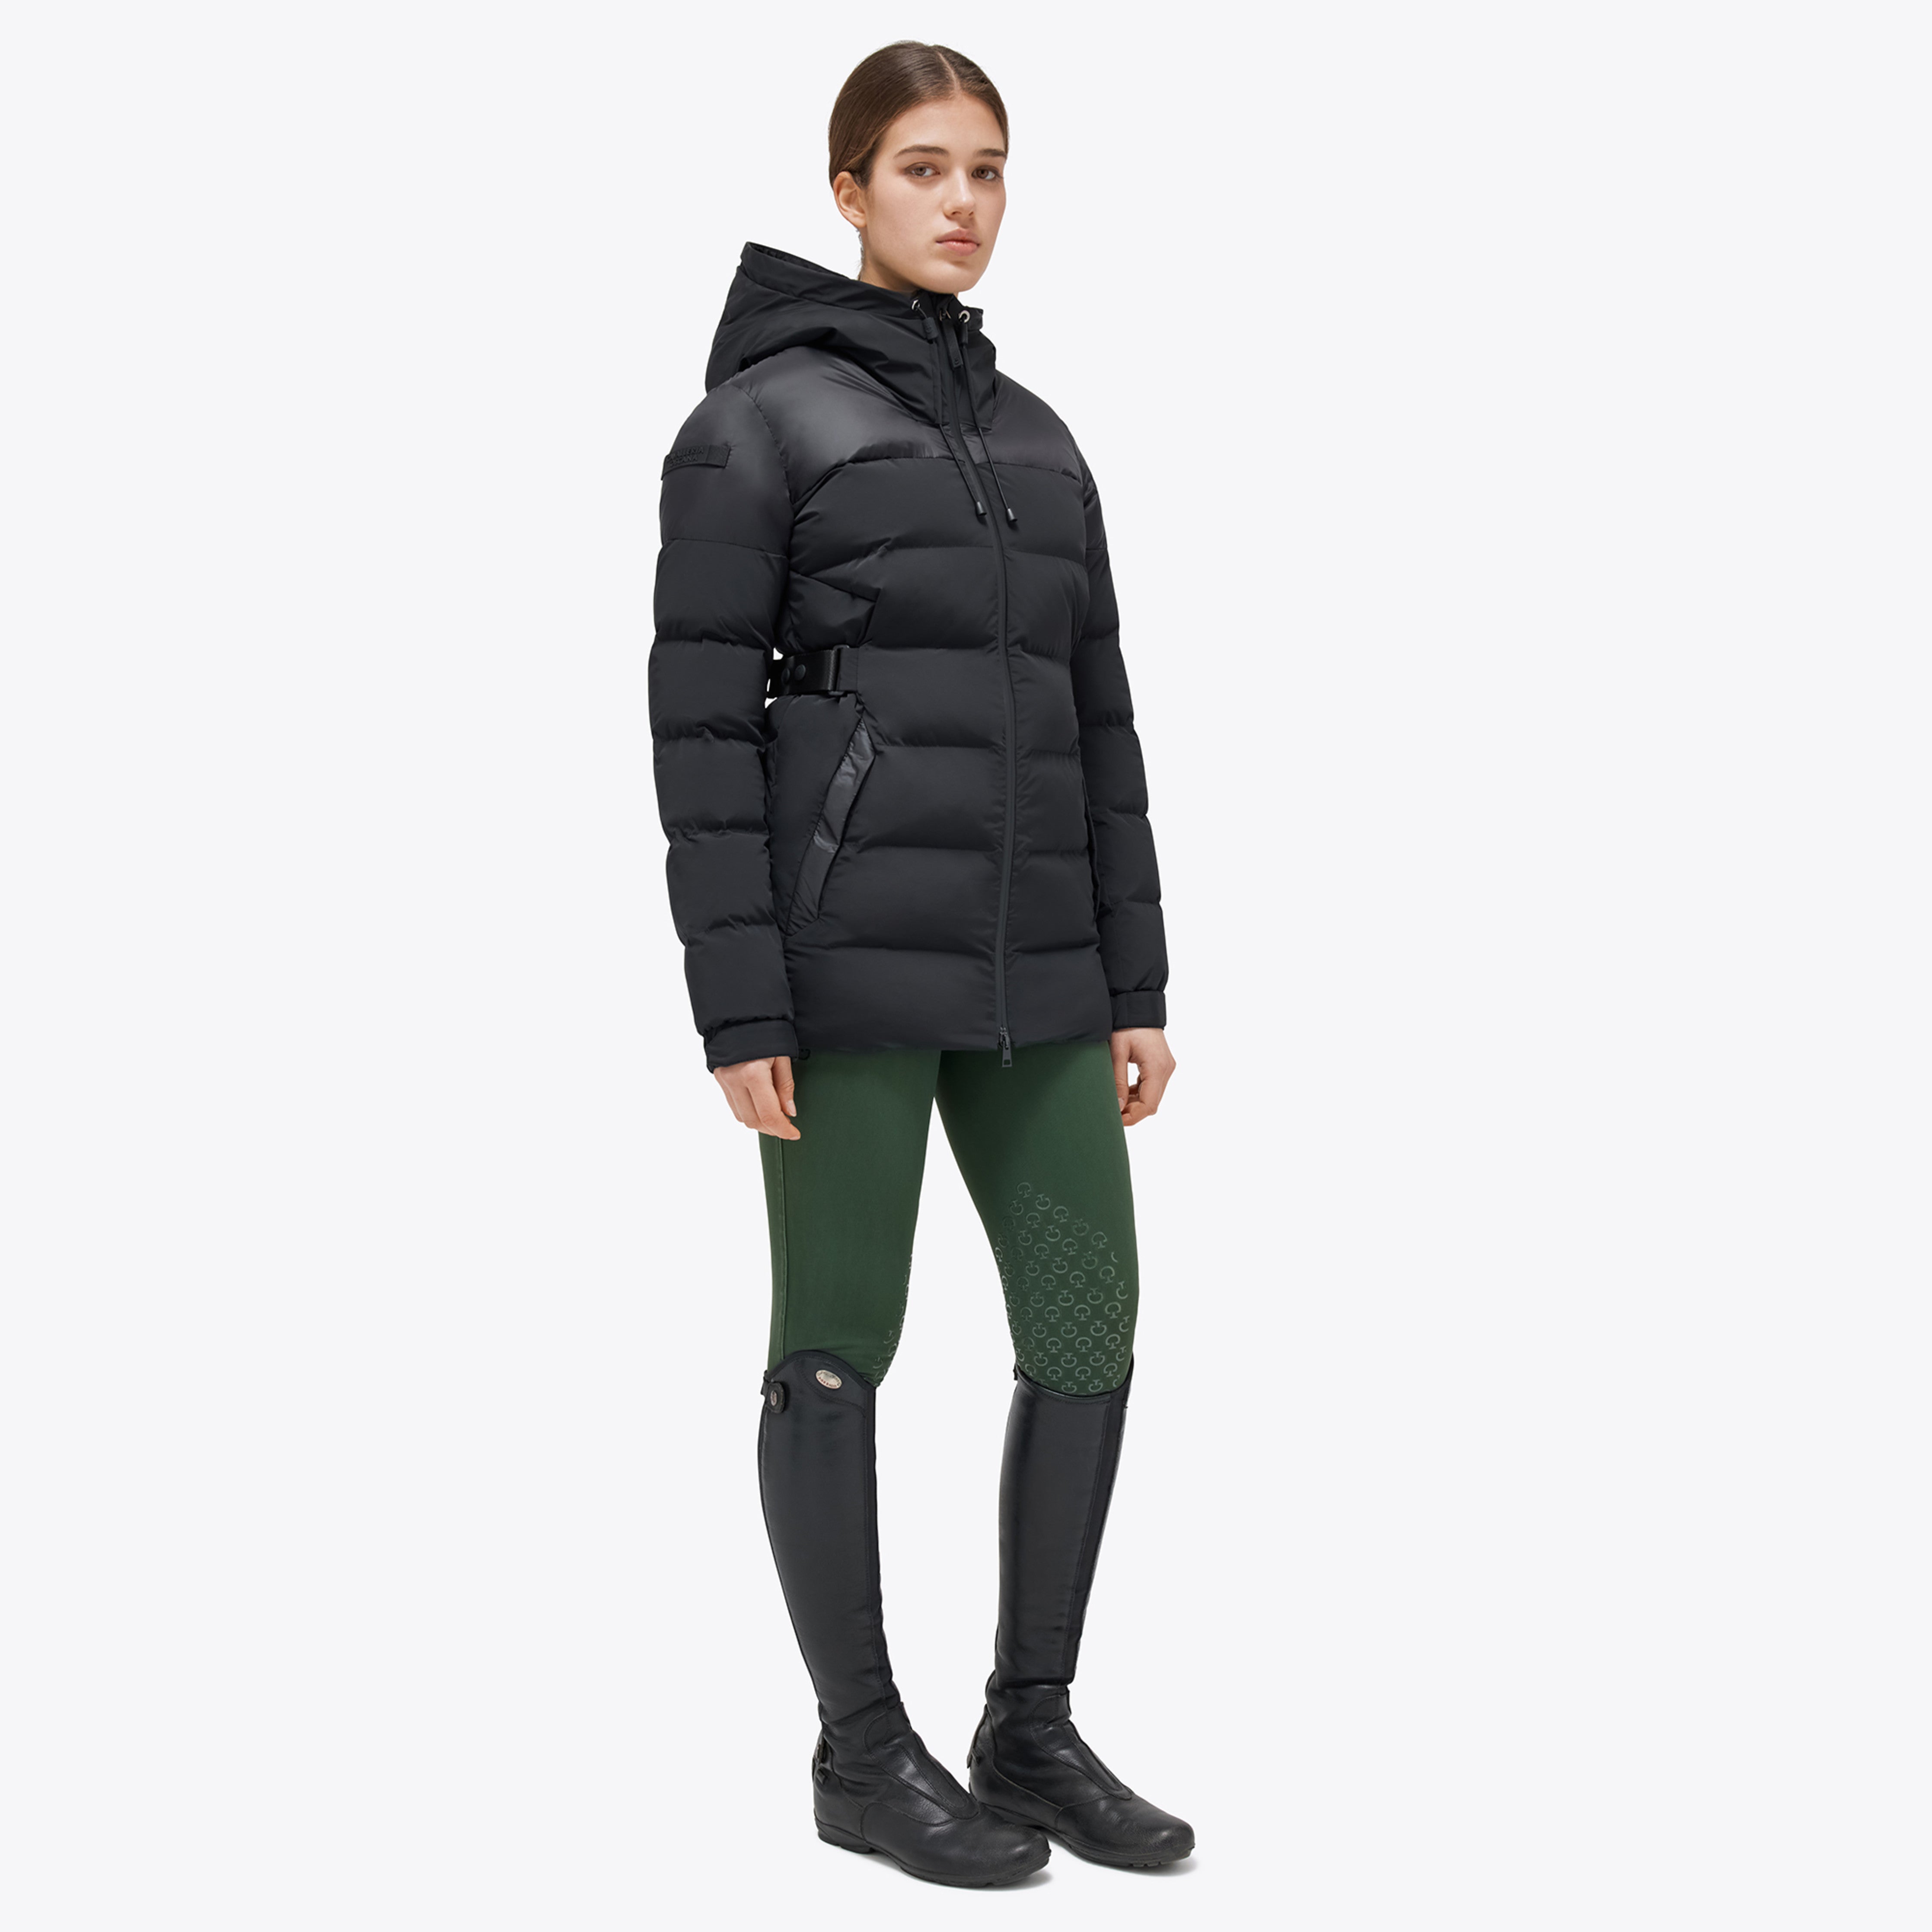 Cavalleria Toscana Long Belted Puffer Jacket ladies